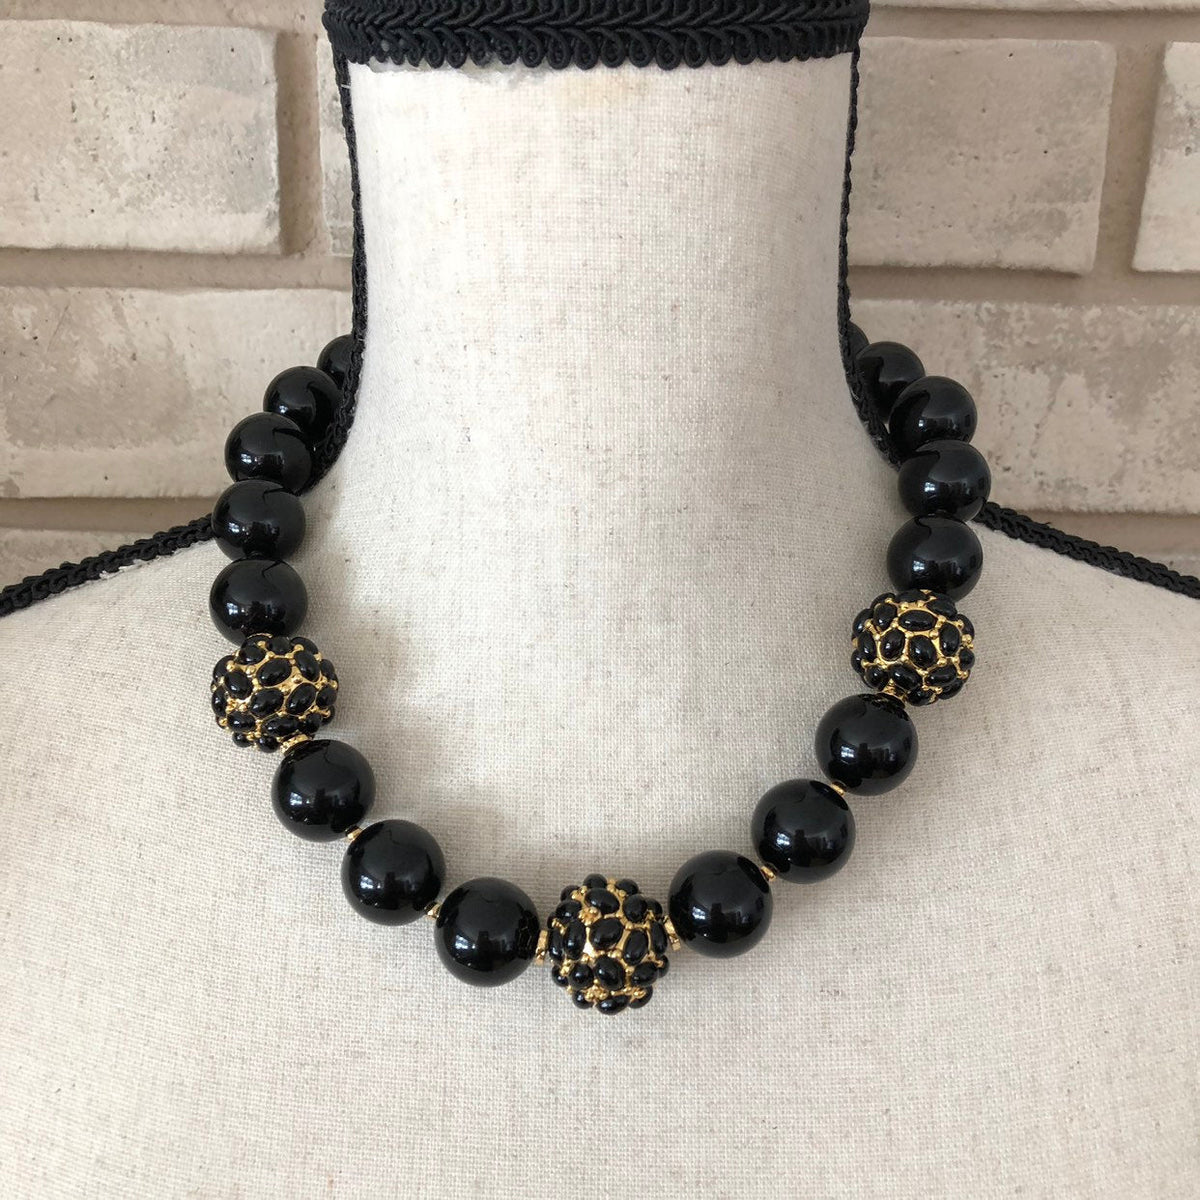 Kenneth Jay Lane Chunky Black Bead Necklace - 24 Wishes Vintage Jewelry